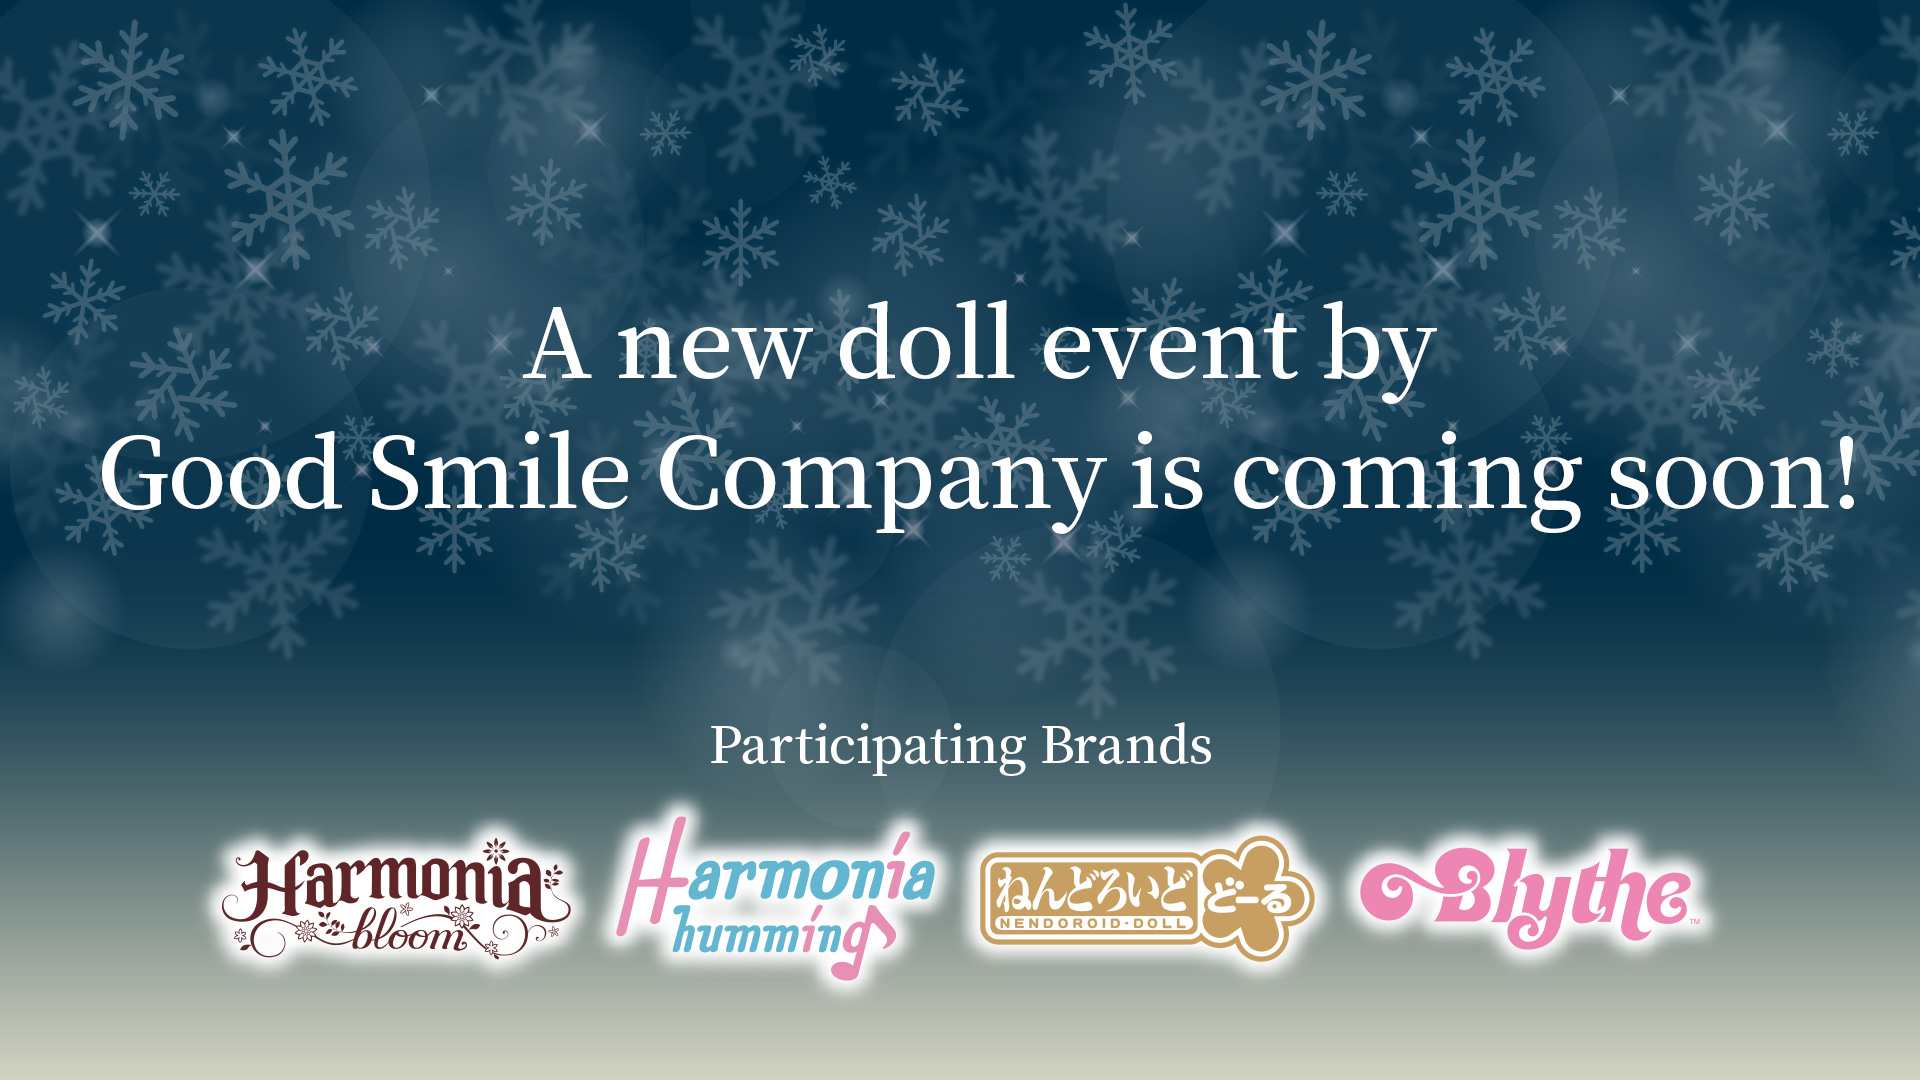 A new doll event is coming soon!